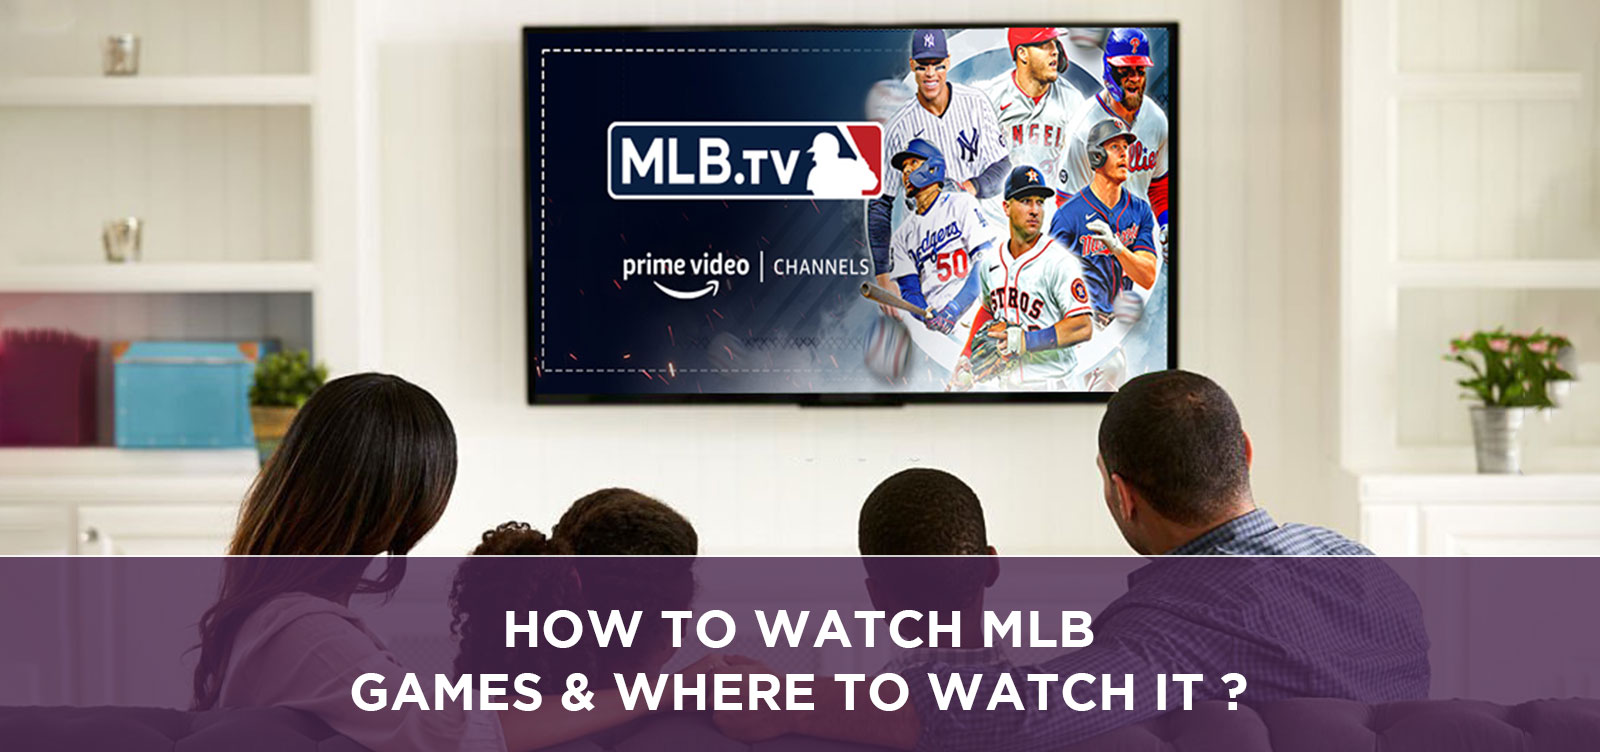 How to watch mlb games & where to watch it?